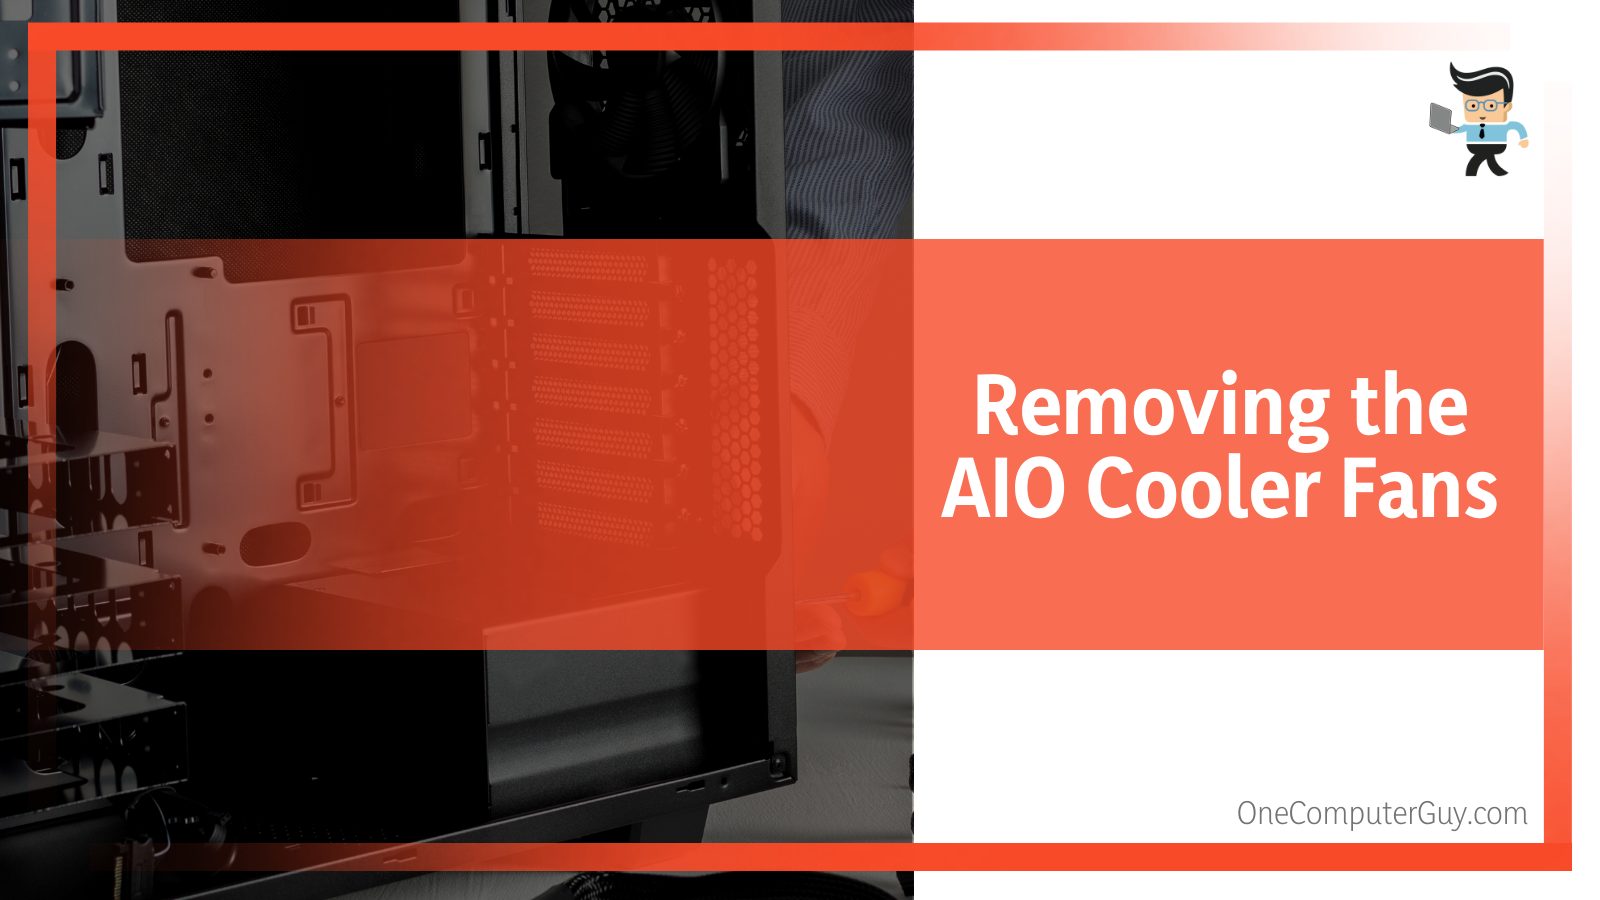 Removing the AIO Cooler Fans